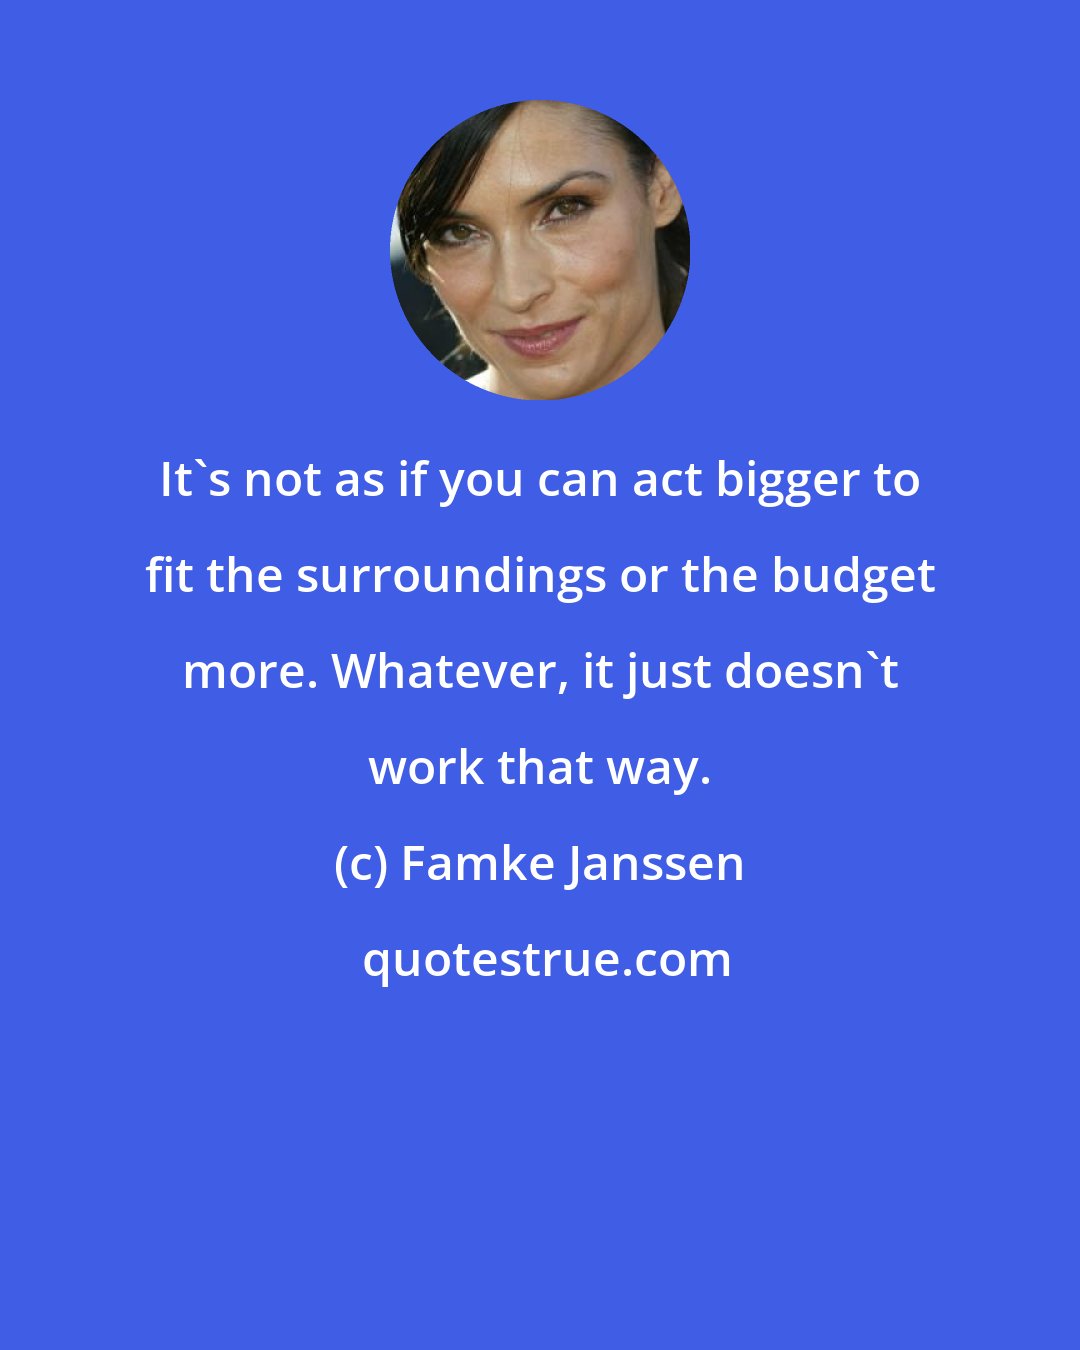 Famke Janssen: It's not as if you can act bigger to fit the surroundings or the budget more. Whatever, it just doesn't work that way.